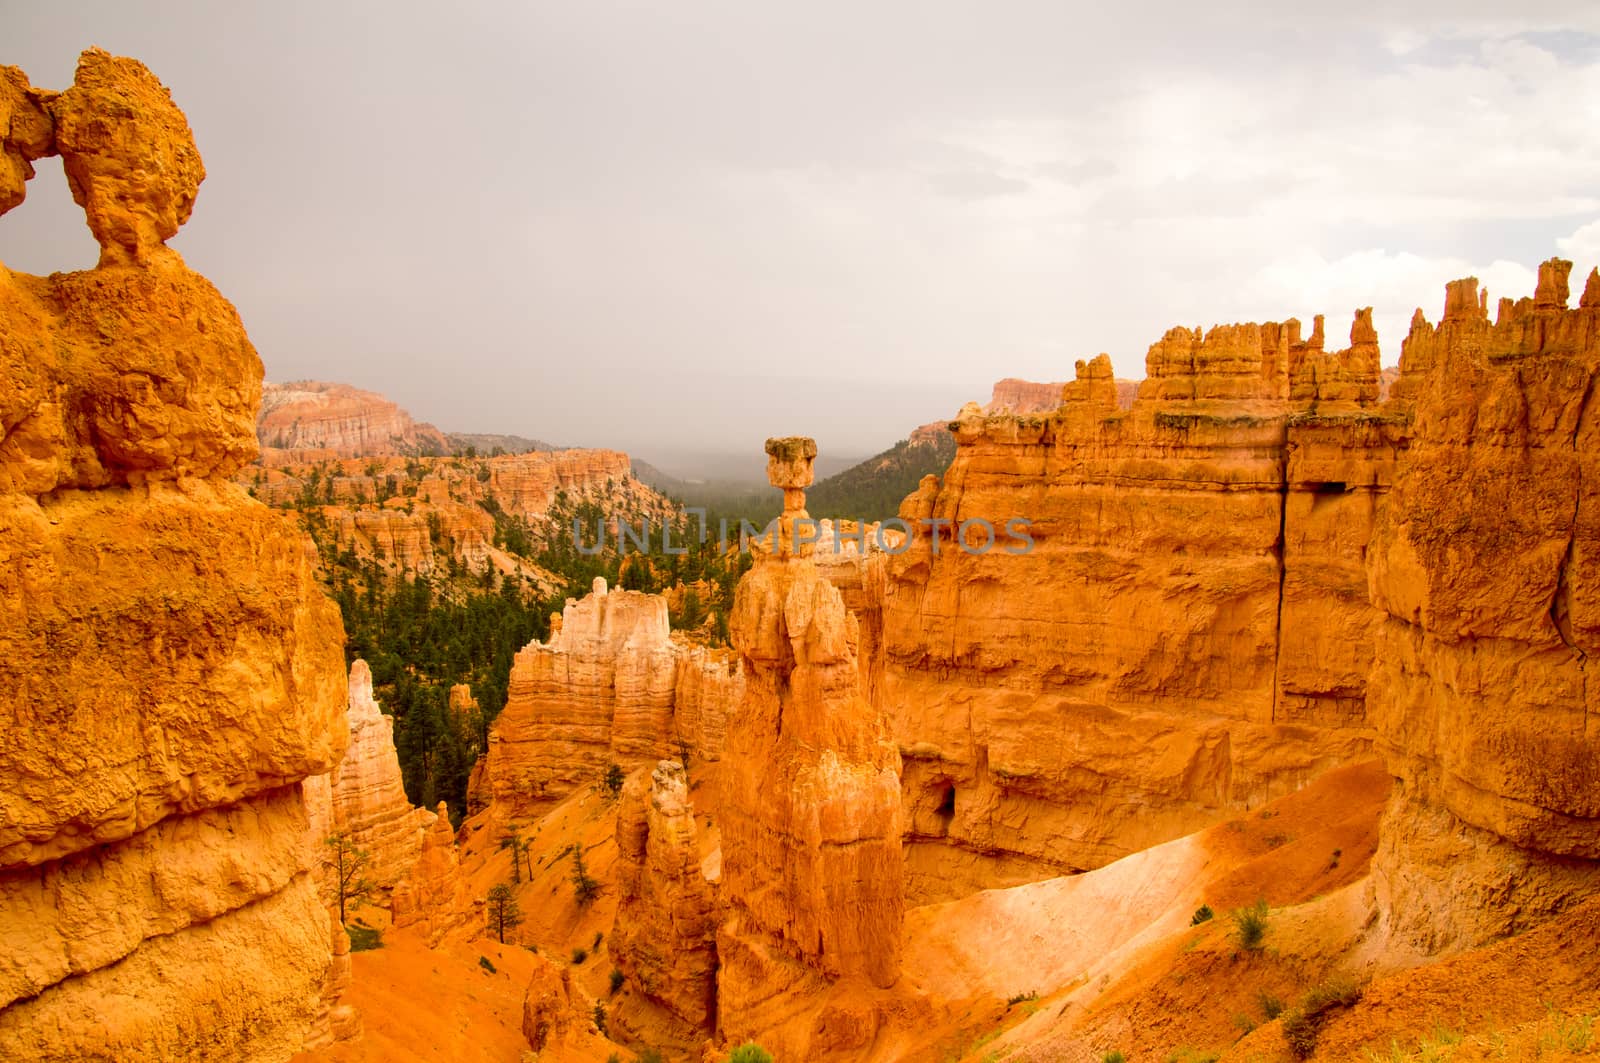 Storm clears over Bryce Canyon National Park, Utah USA